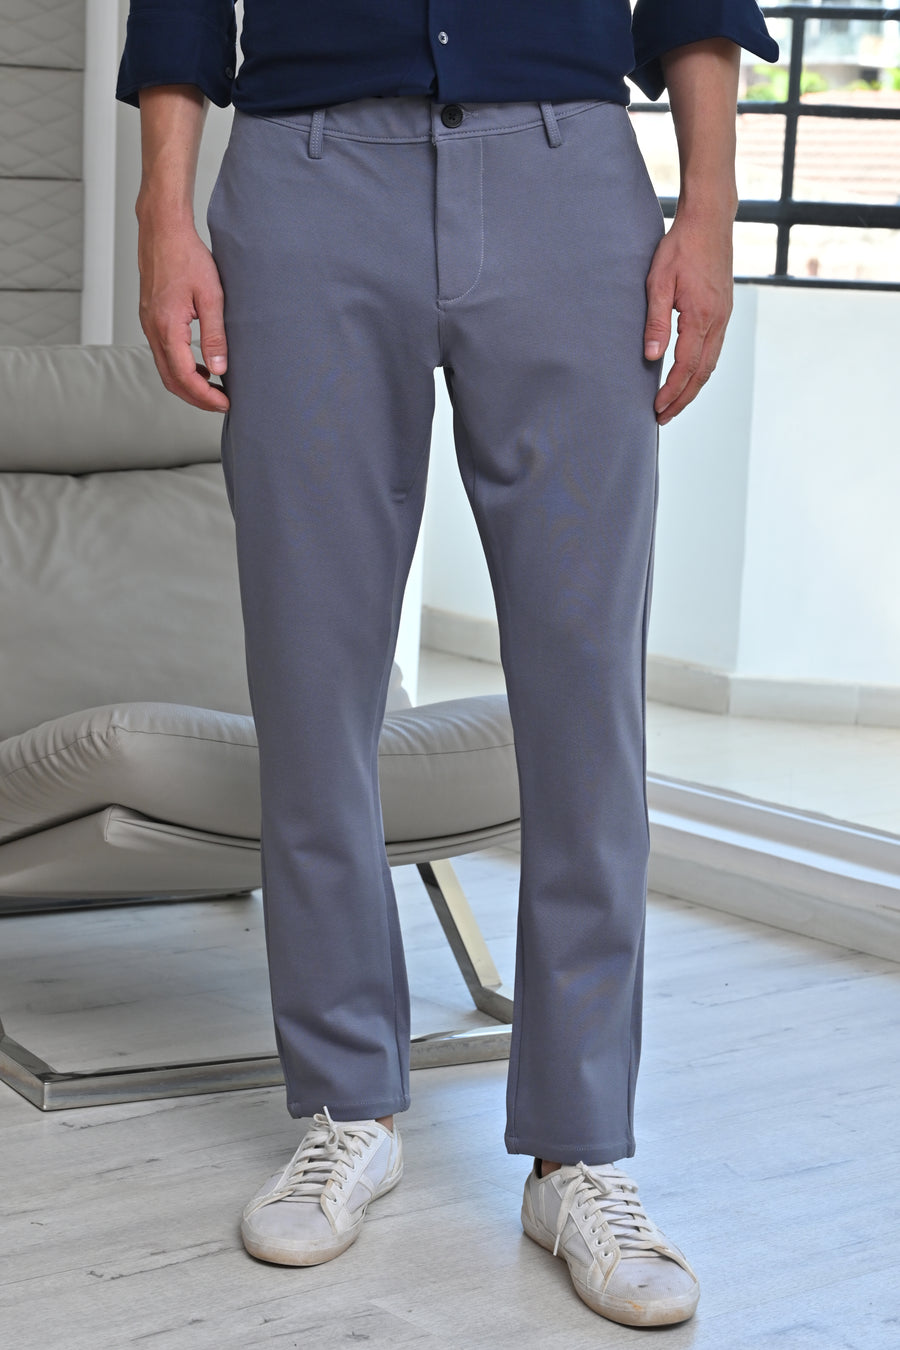 Atlee - Comfort Knitted Trouser - Grey